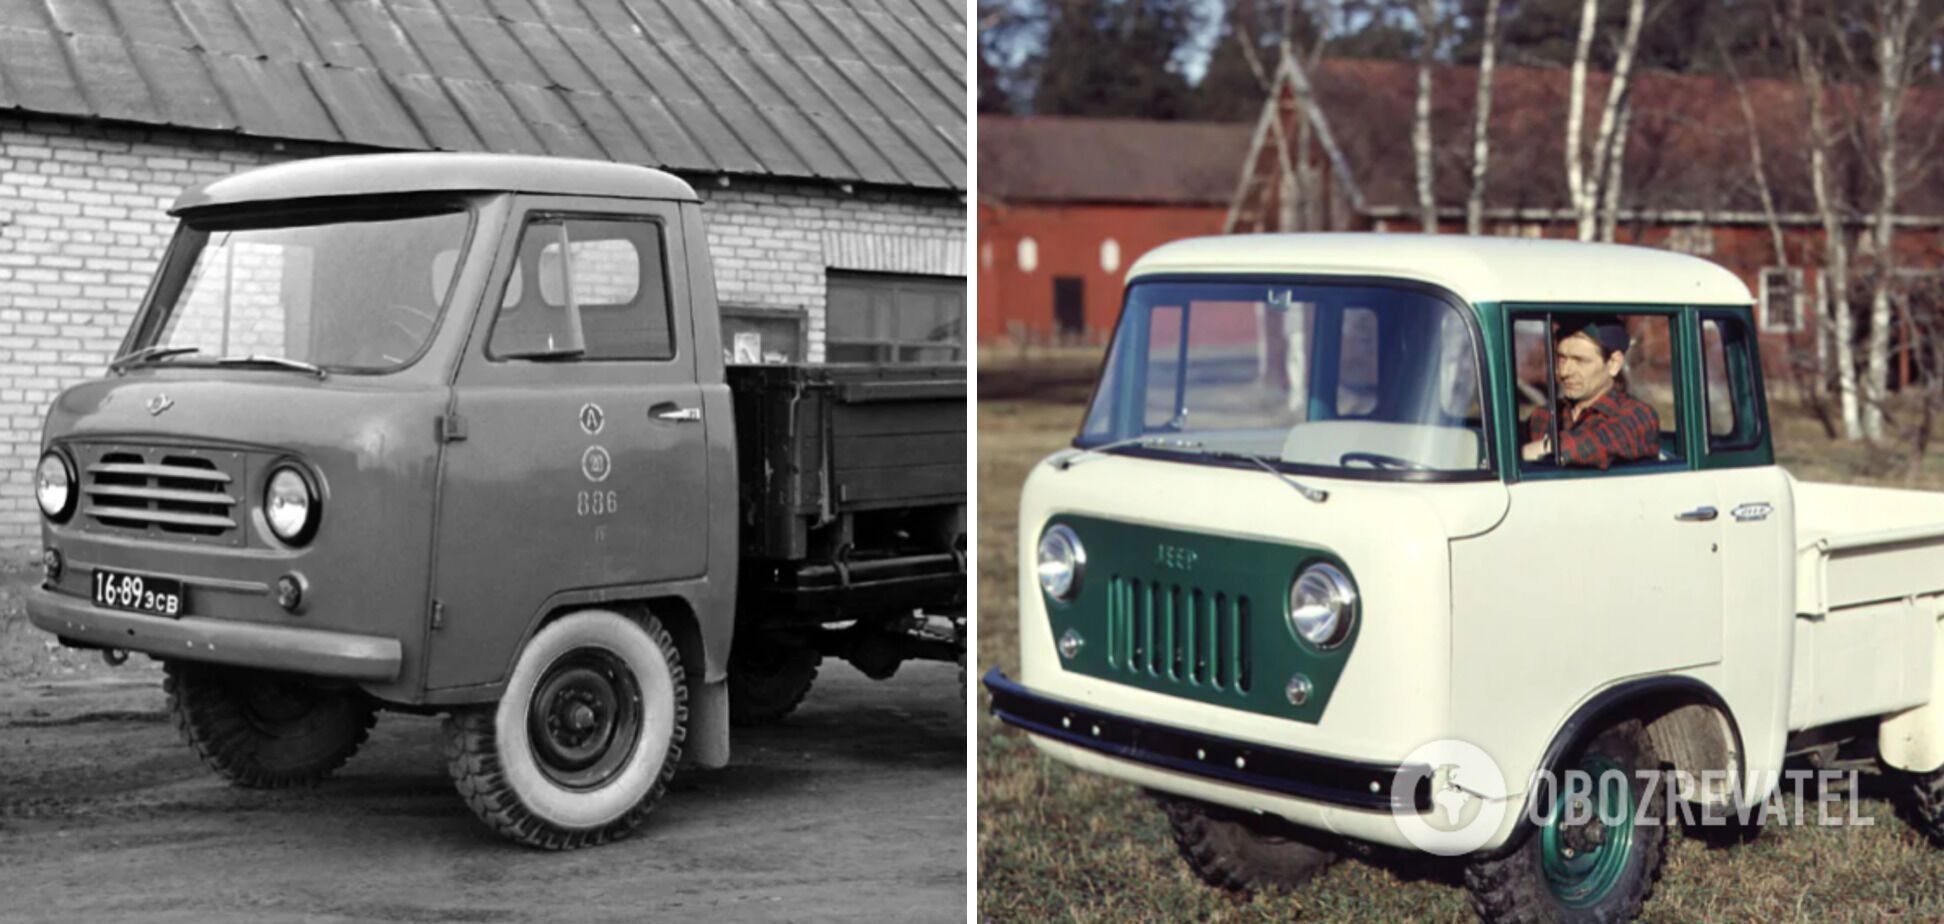 Stolen everything, even the Zaporozhets: top 10 cars from the USSR that were plagiarized